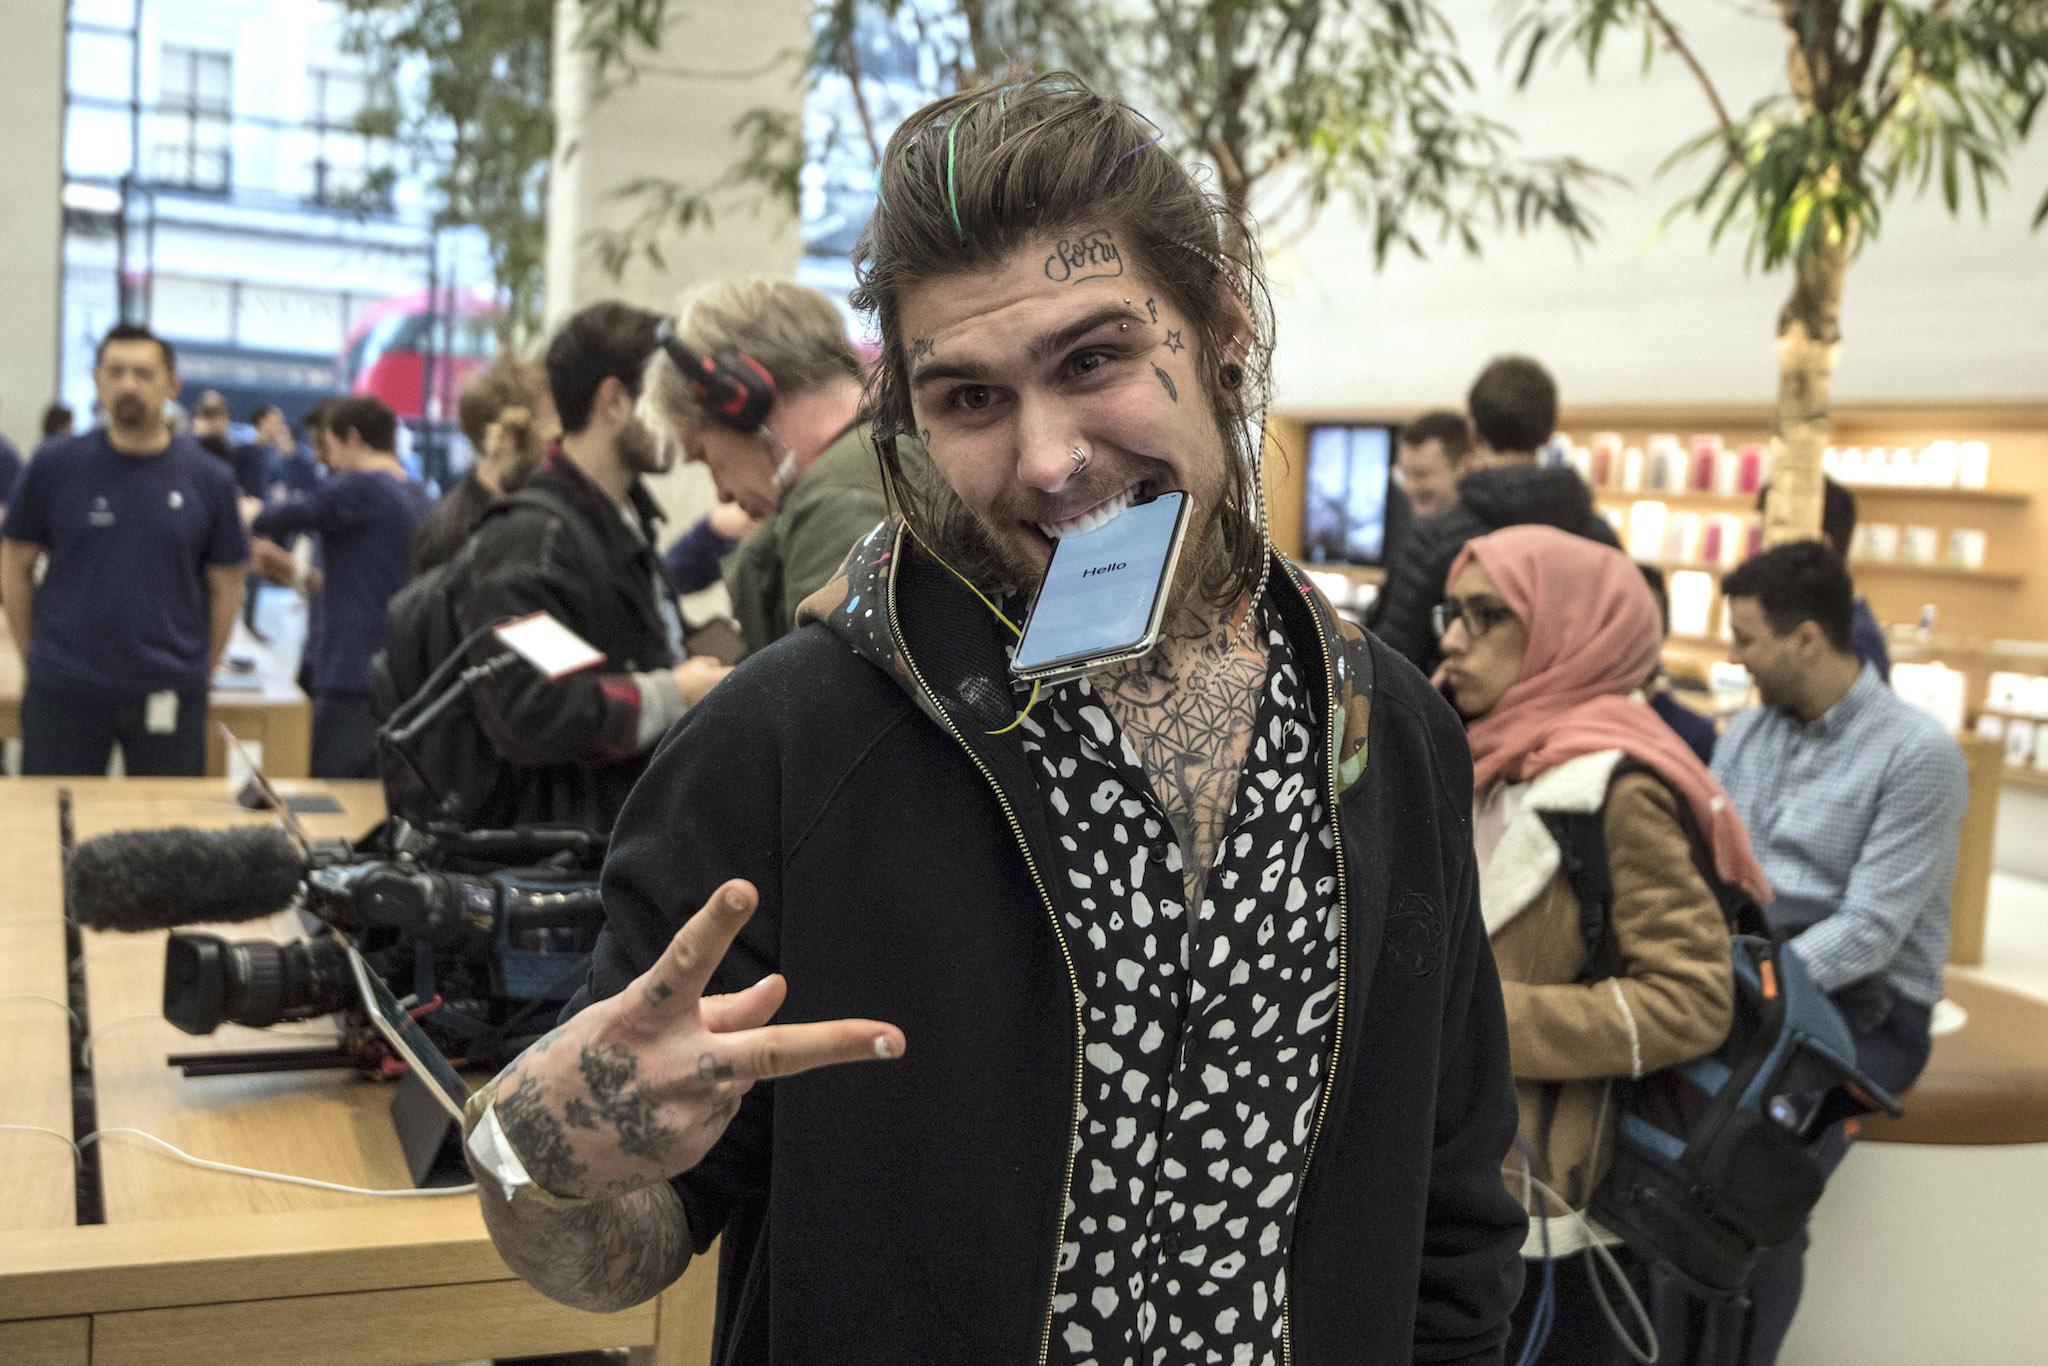 Marco Pierre White Jr poses with an iPhone X after being the first to buy one upon its release in the U.K, on November 3, 2017 in London, England. The iPhone X is positioned as a high-end, model intended to showcase advanced technologies such as wireless charging, OLED display, dual cameras and a face recognition unlock system